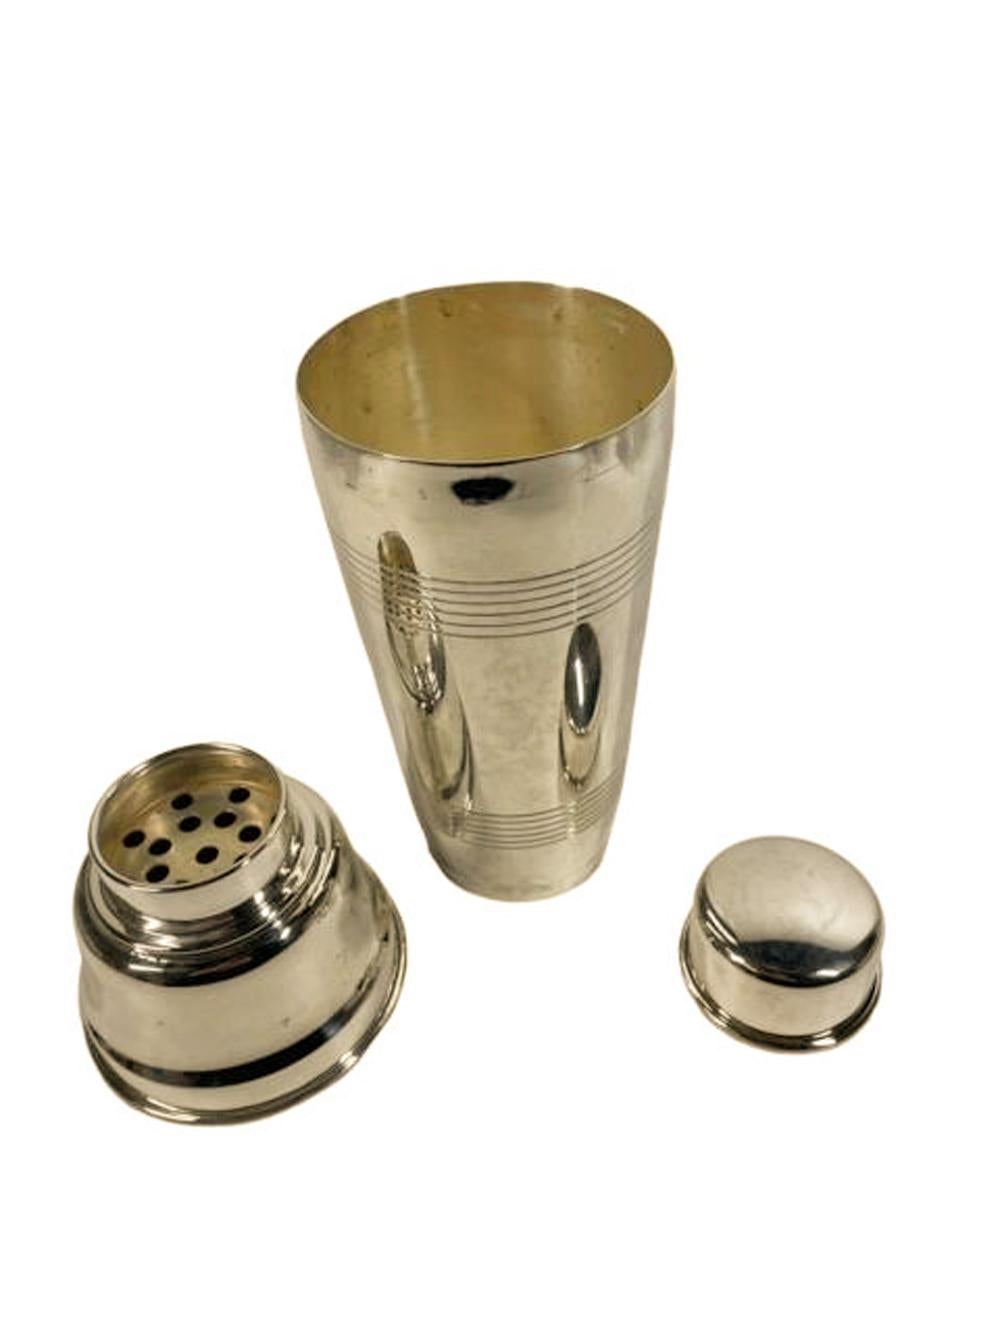 Art Deco Silver Plate Cobbler Type Cocktail Shaker Made by Gaskell & Chambers For Sale 3